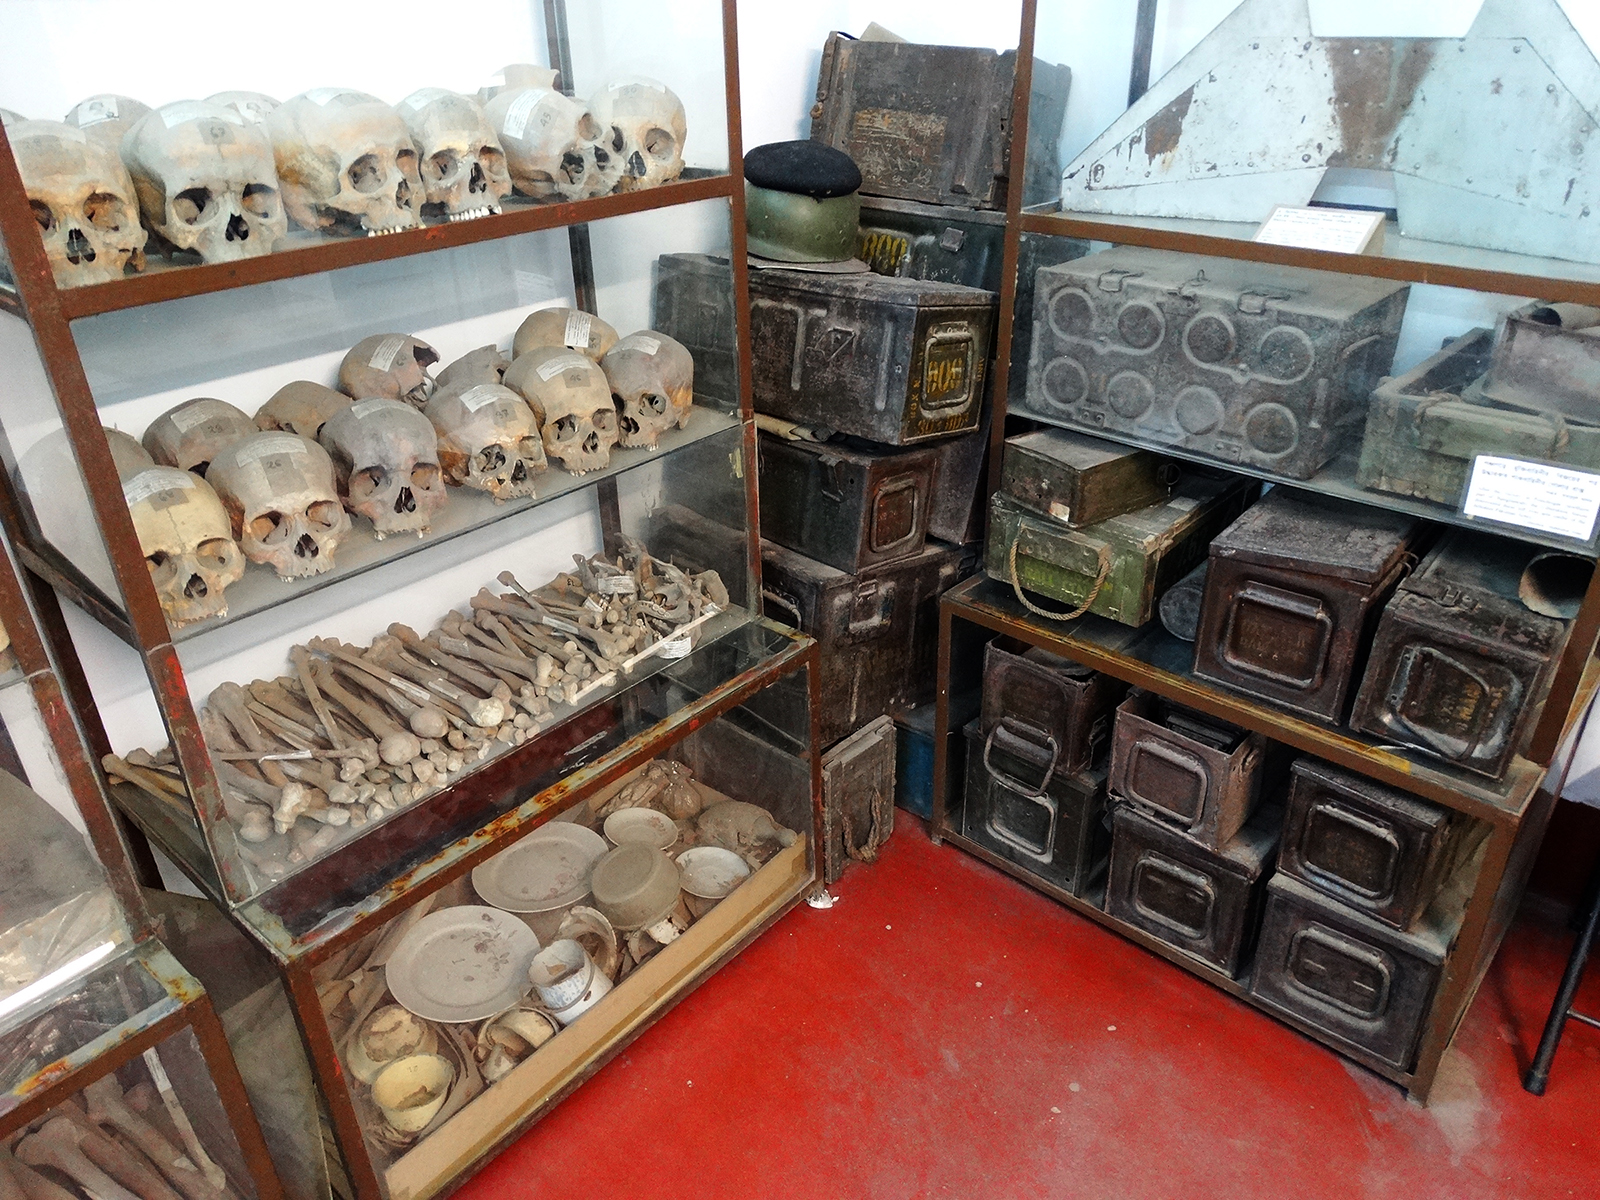 Human remains and war materiels from the 1971 Bangladesh Genocide on display at the Liberation War Museum in Dhaka, Bangladesh. (Photo by Adam Jones/Wikipedia/Creative Commons)